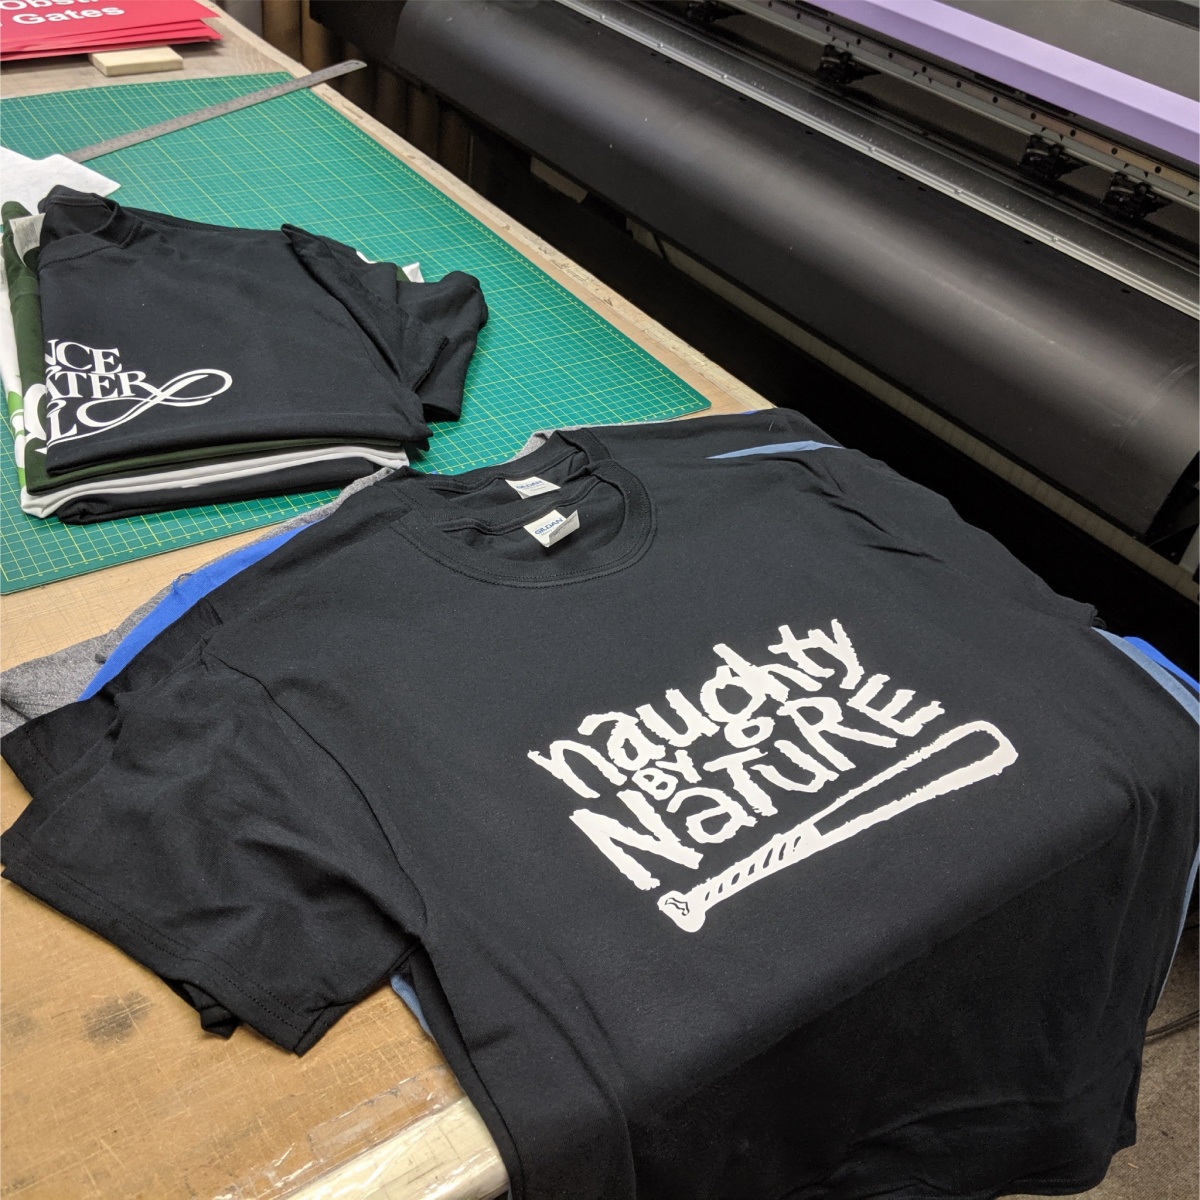 selection of t-shirts currently being printed